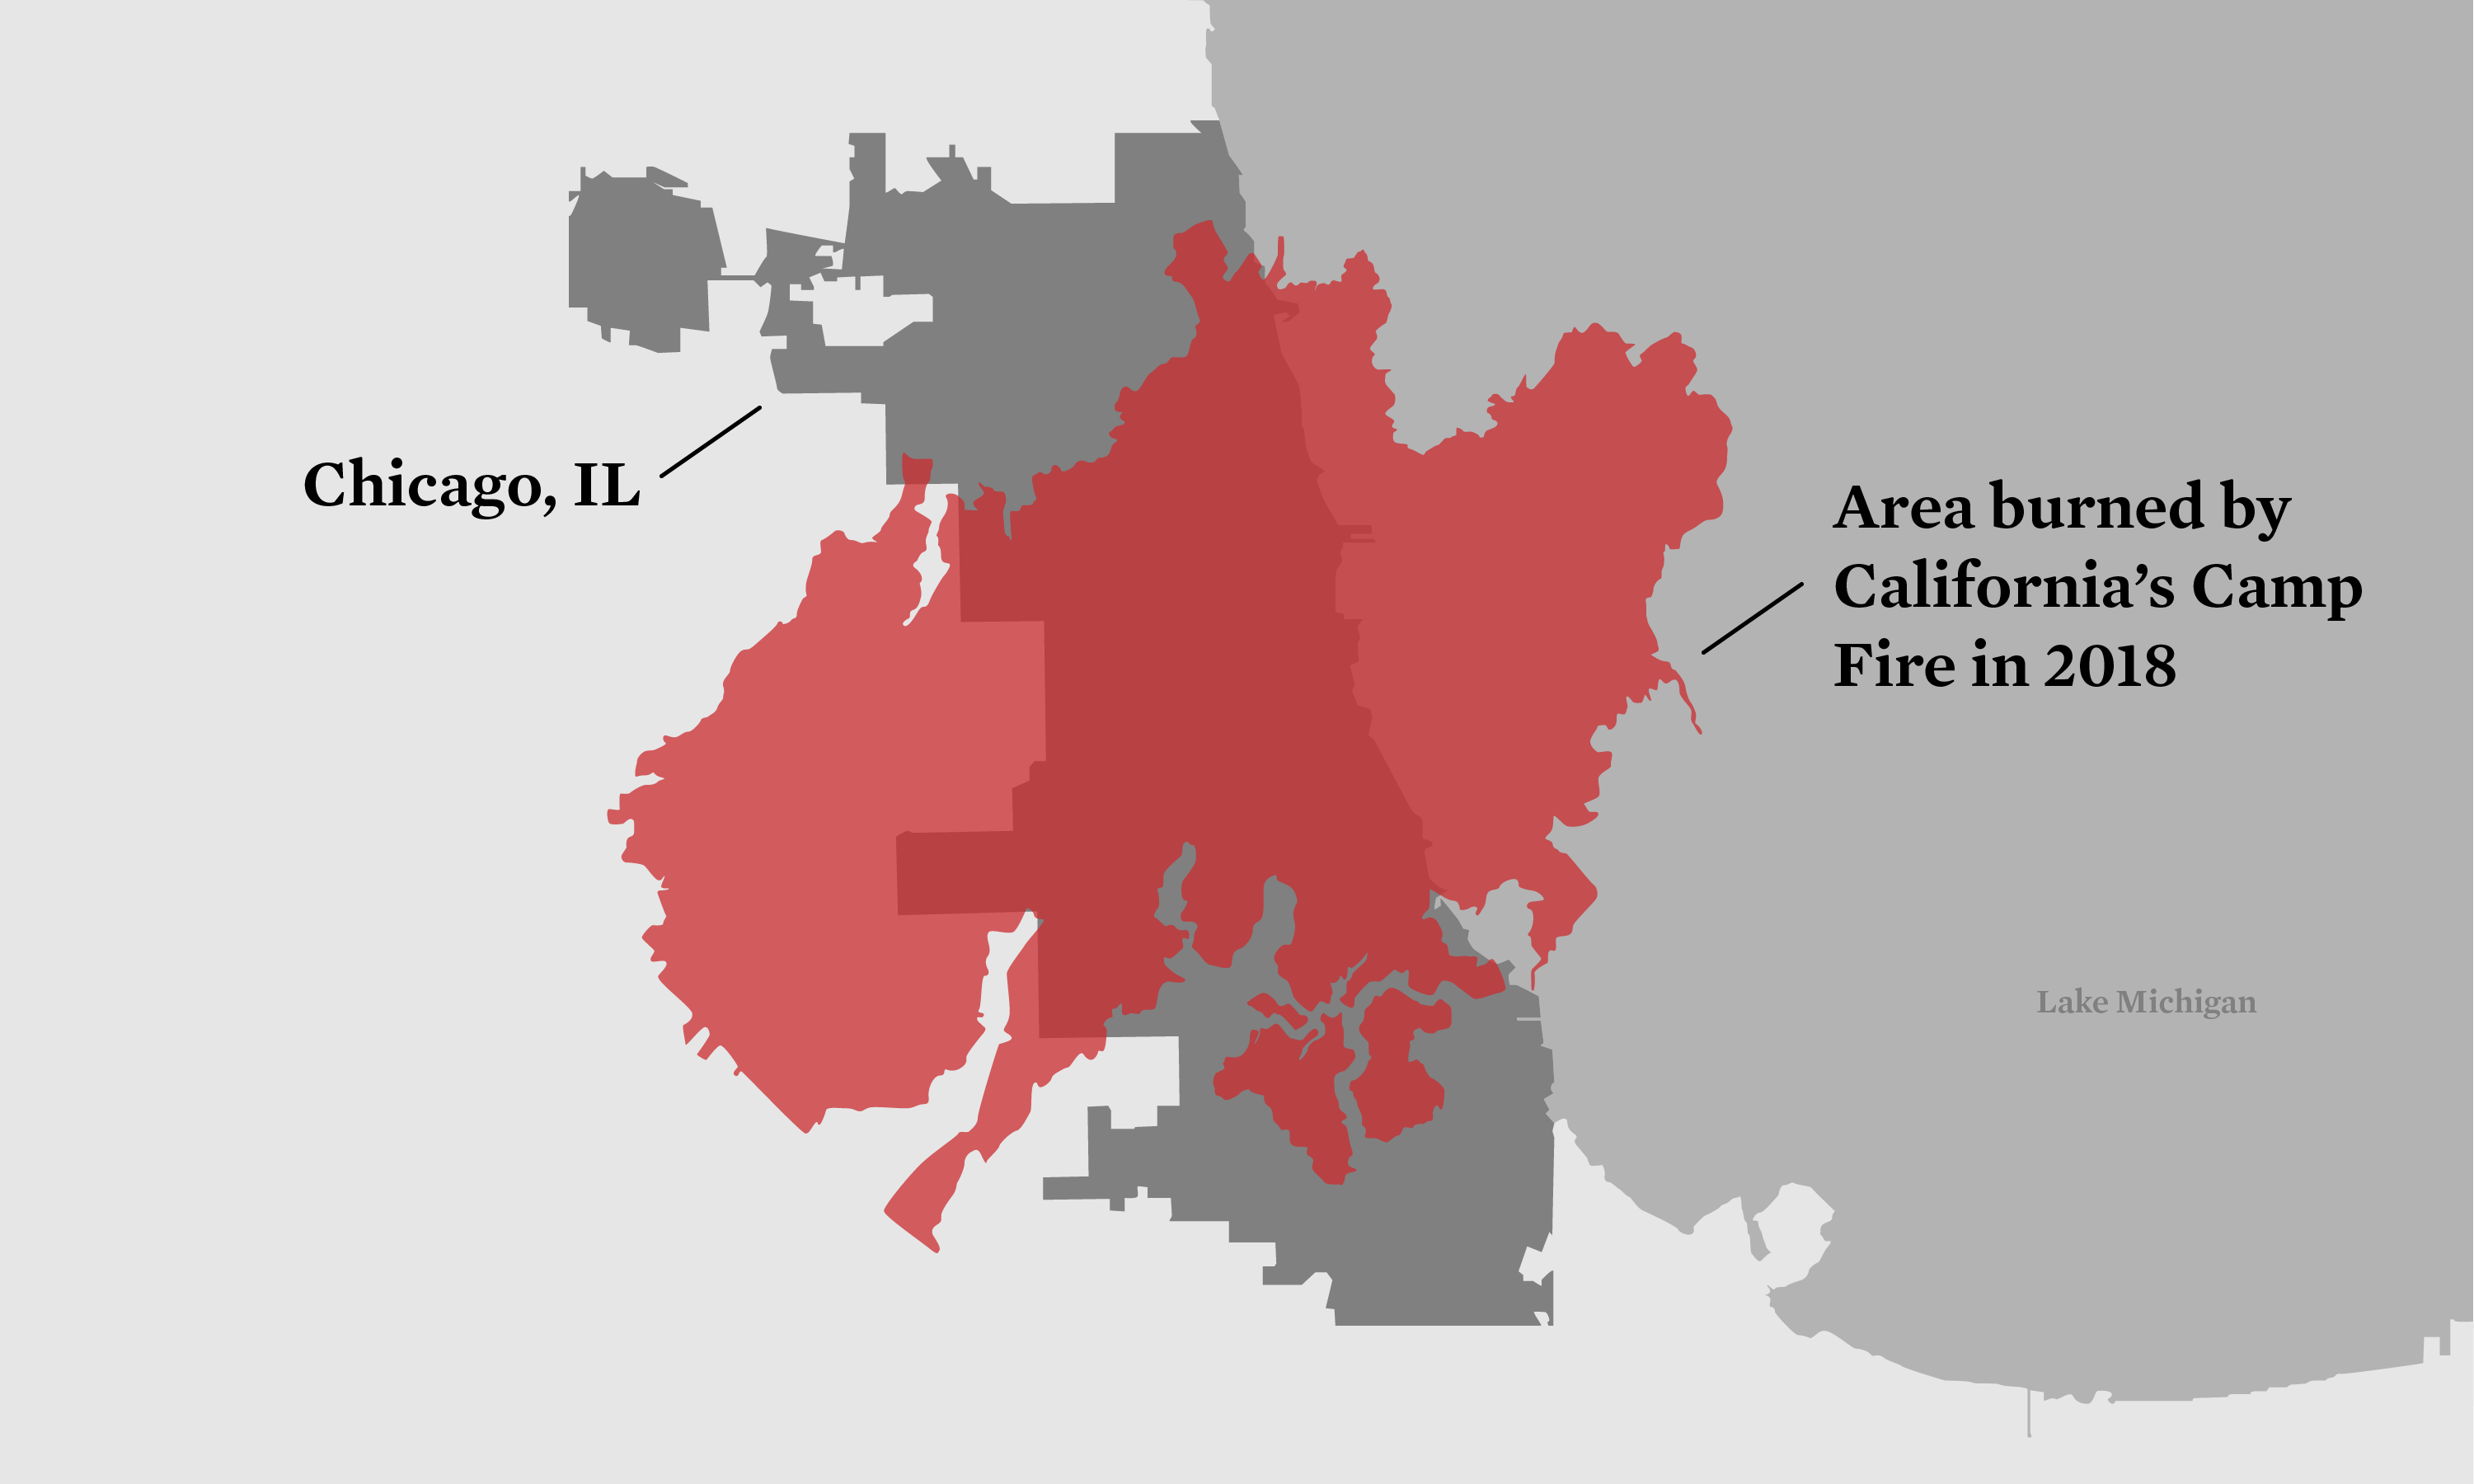 The perimeter of the Camp Fire overlayed on Chicago for scale